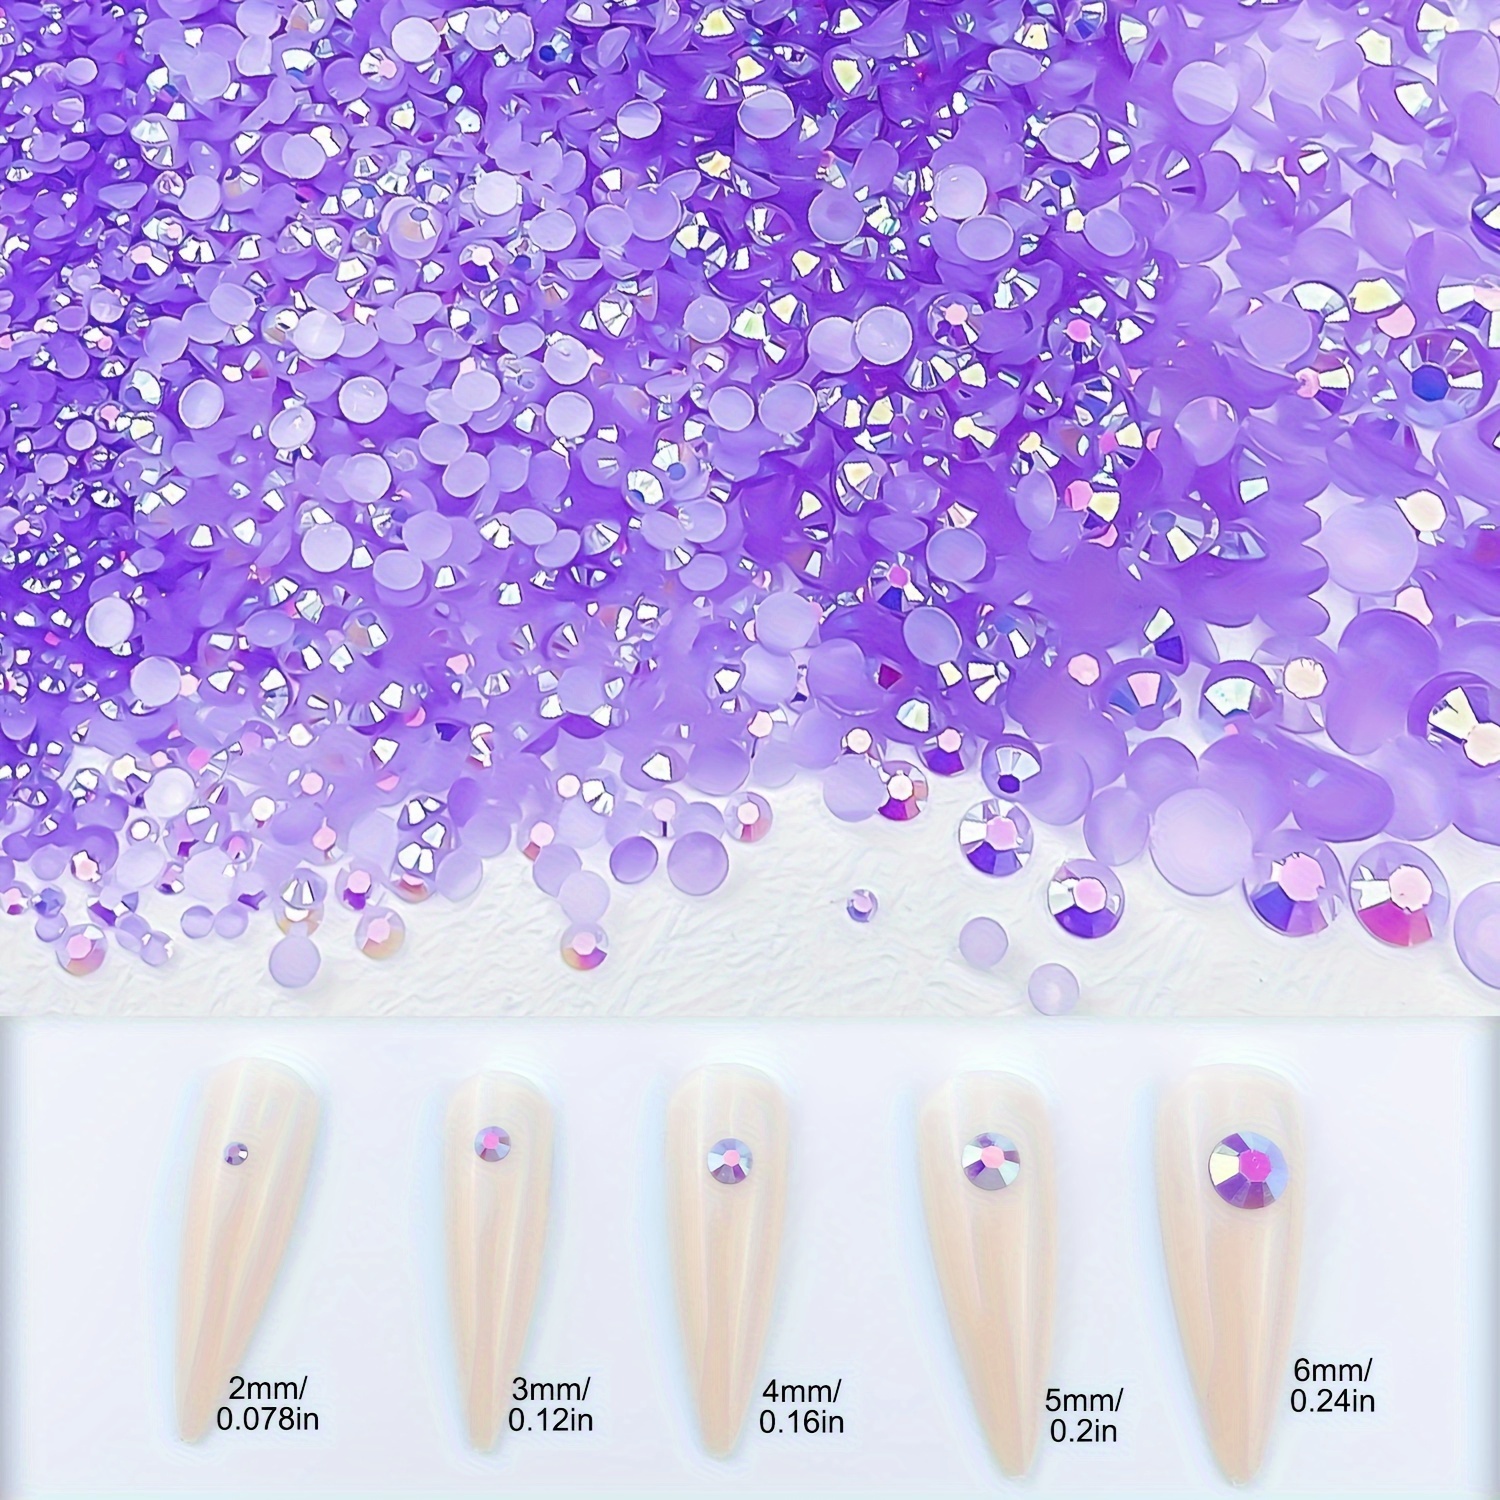 20100Pcs Purple Rhinestones Flatback with B-7000 Gel Glue for Crafts Clothing, Flat Back Velet Purple AB Gems Transparent Jelly Resin for Clothes